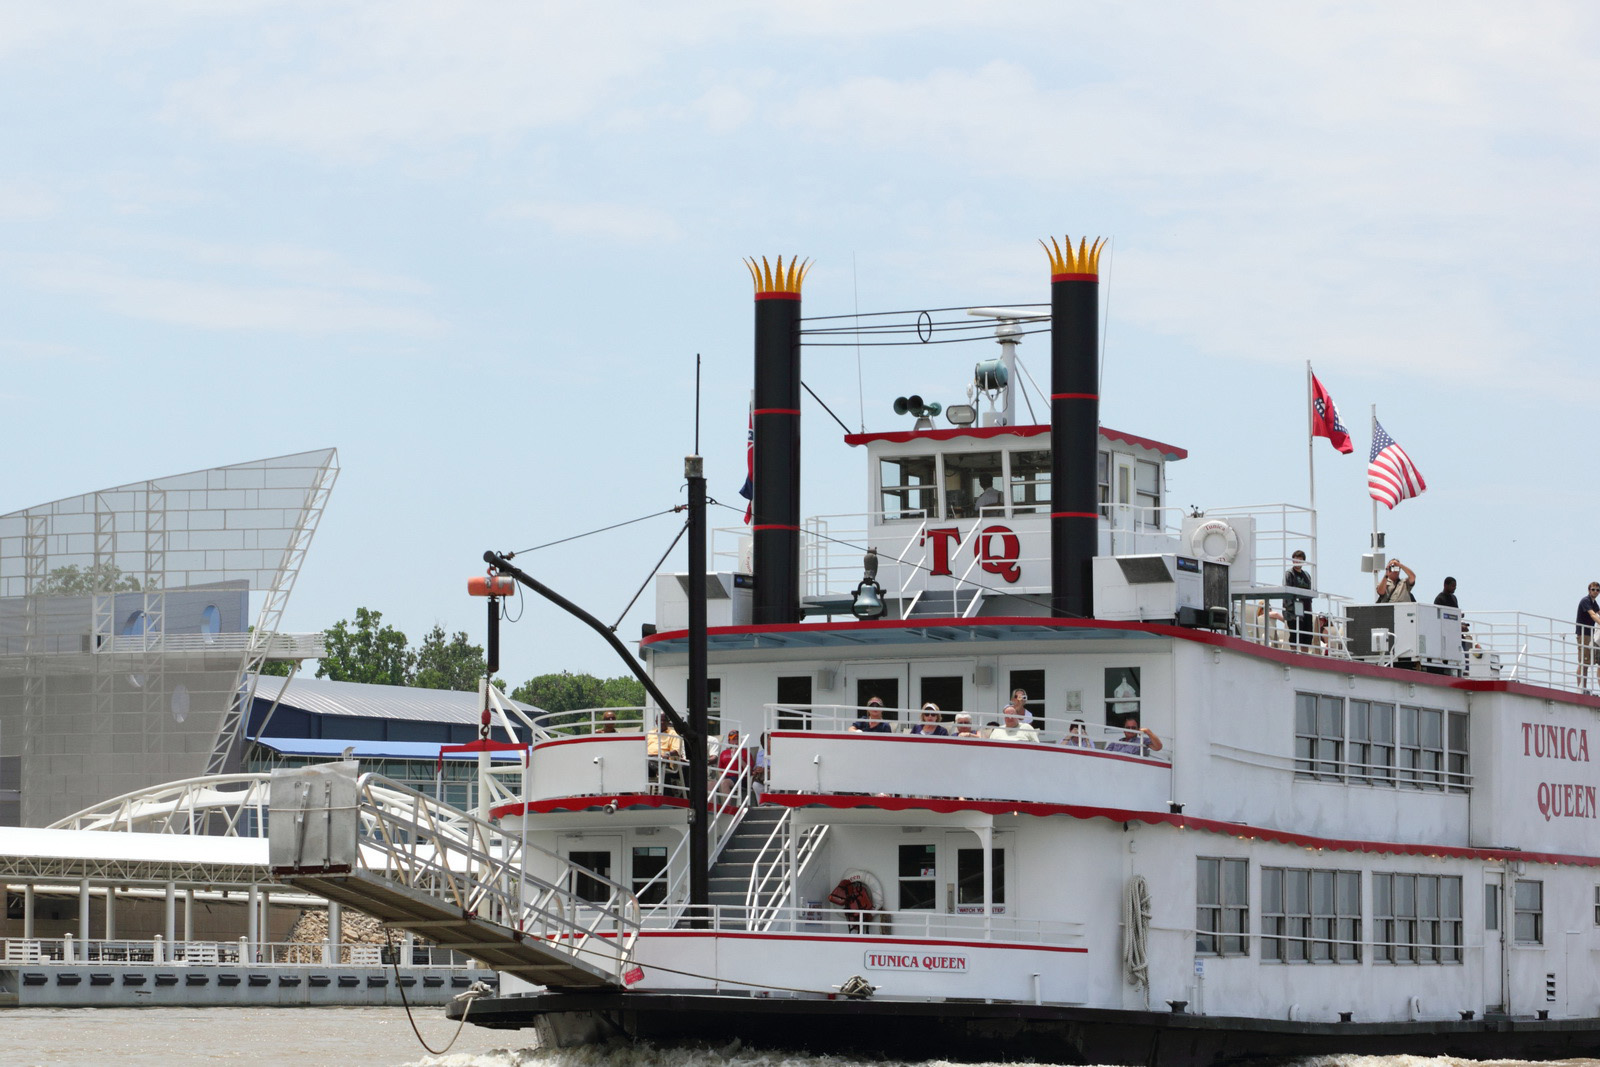 Tunica Queen Riverboat.